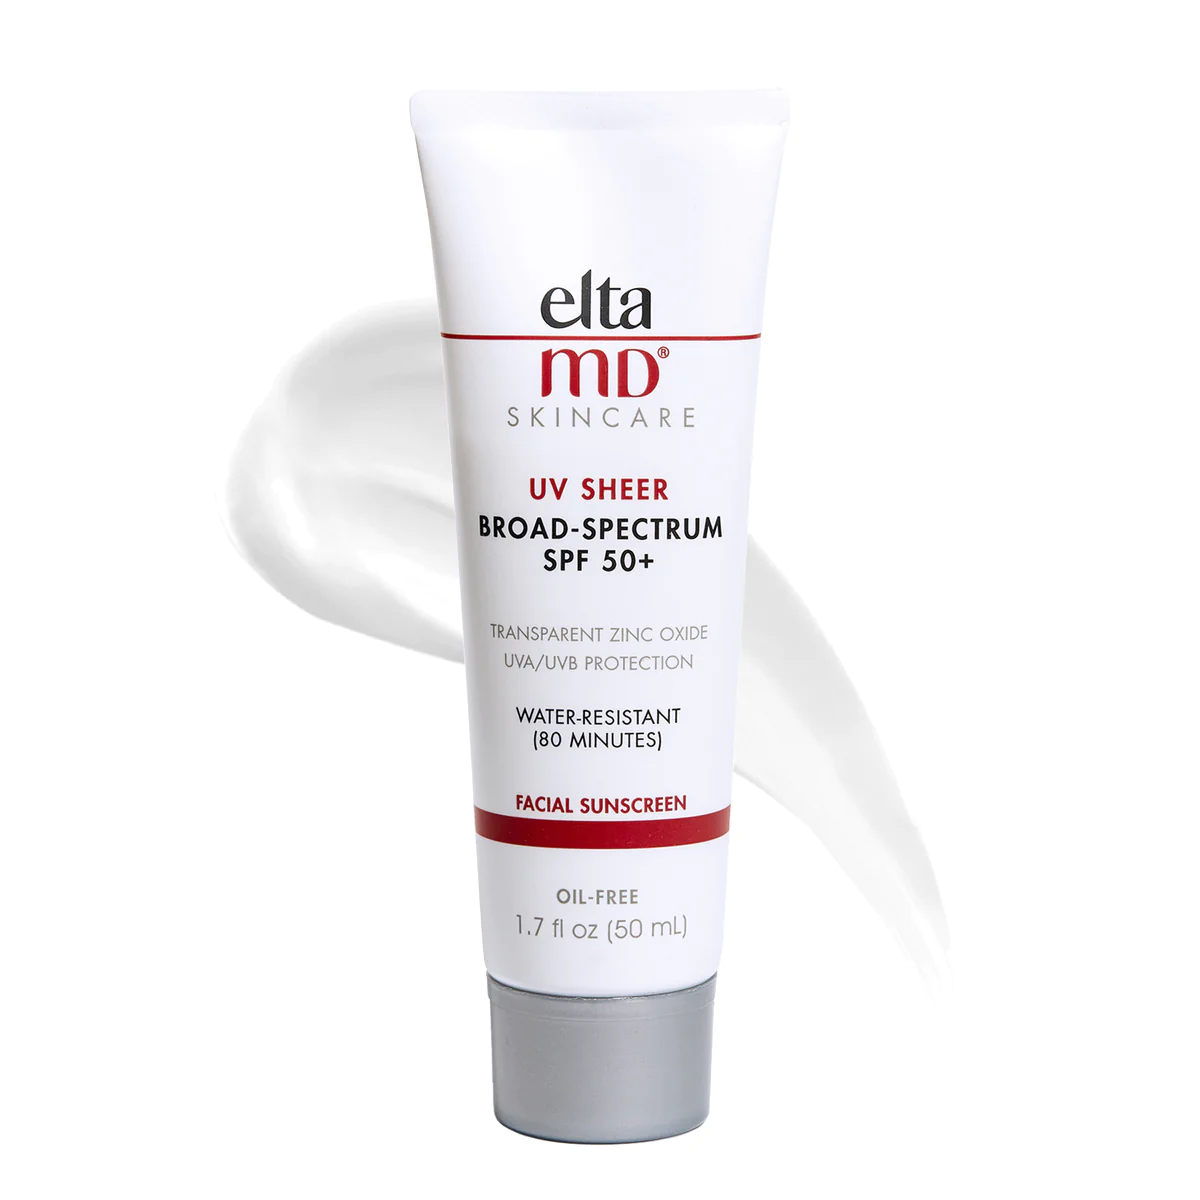 FEMMENORDIC's choice in the Elta MD Sheer vs Clear sunscreen comparison, the Elta MD UV Sheer Facial Sunscreen